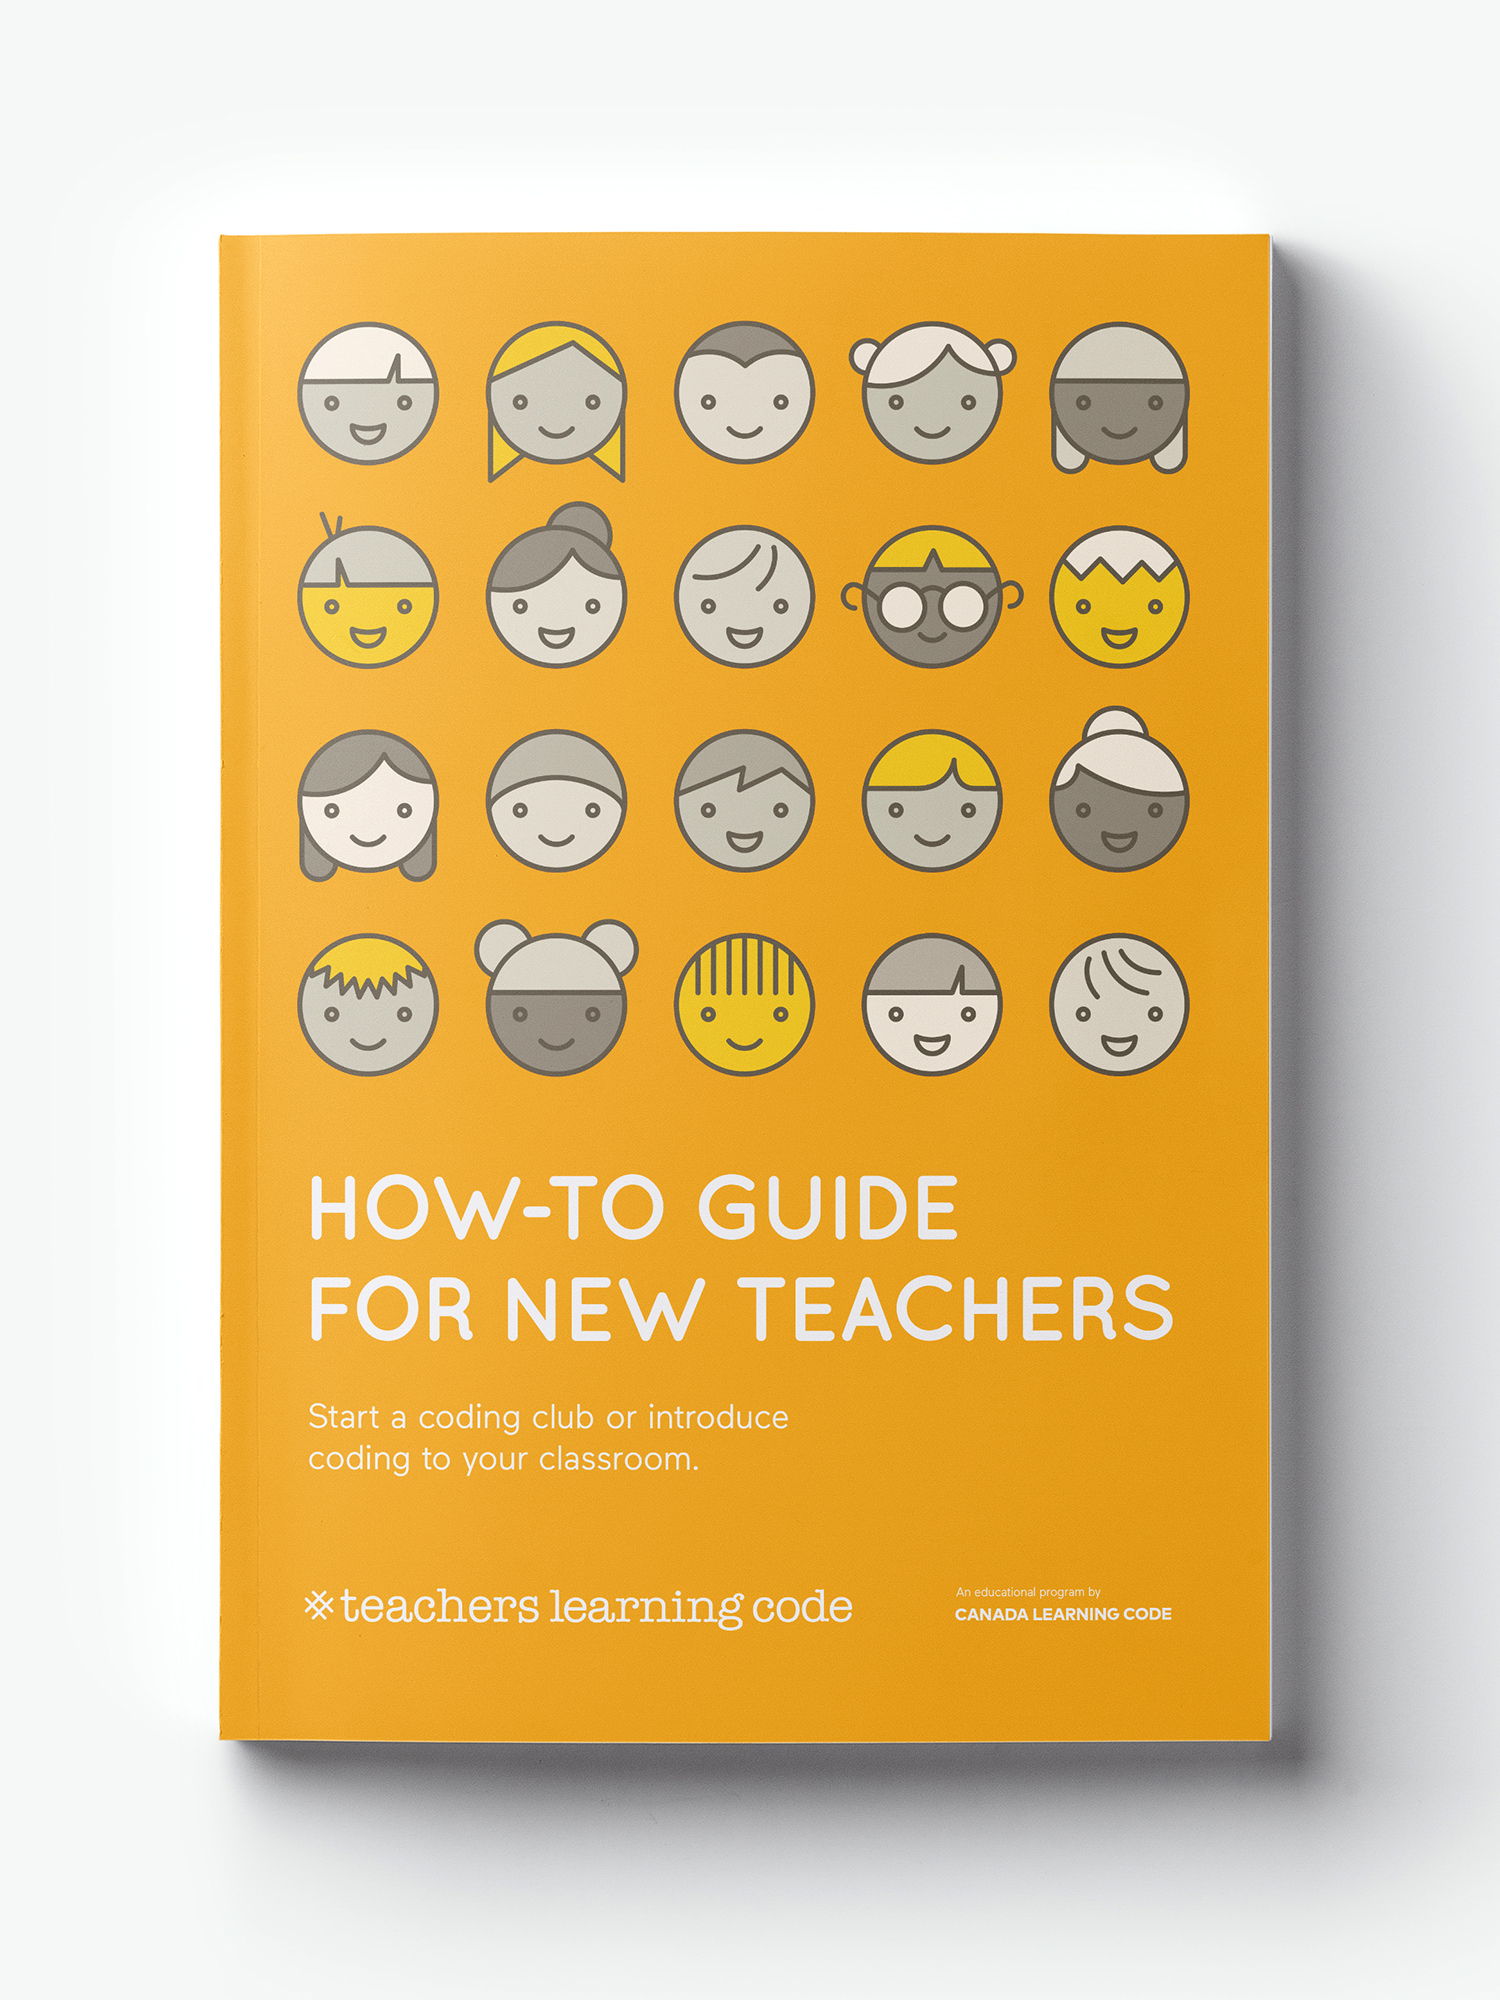 How-to guide cover design showcasing identity typography and illustration for Teachers Learning Code